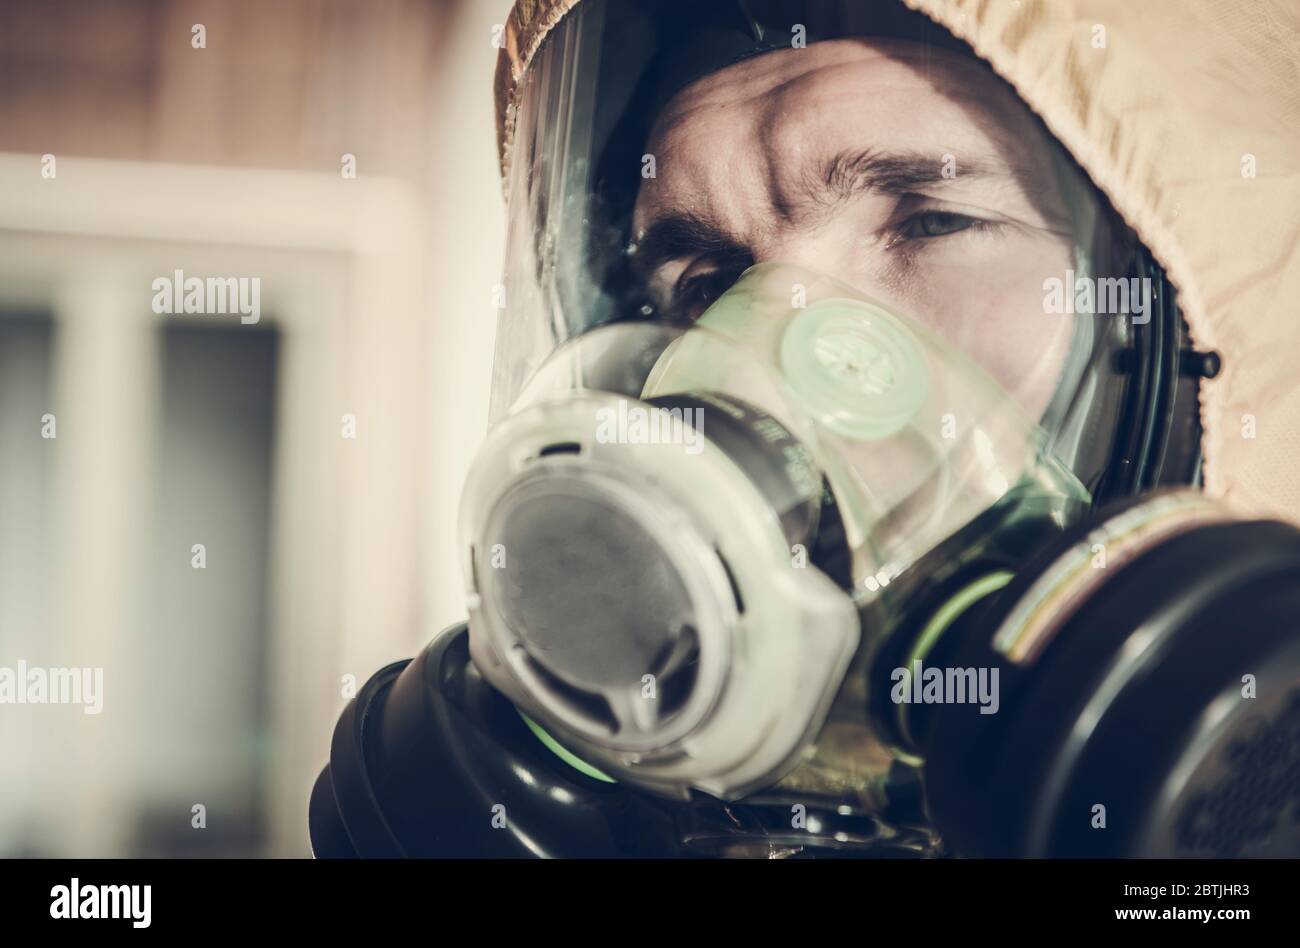 Very Tired Men in Safety Biohazard Mask Covering His Face. Disinfection Public Places During Virus Pandemic. Stock Photo